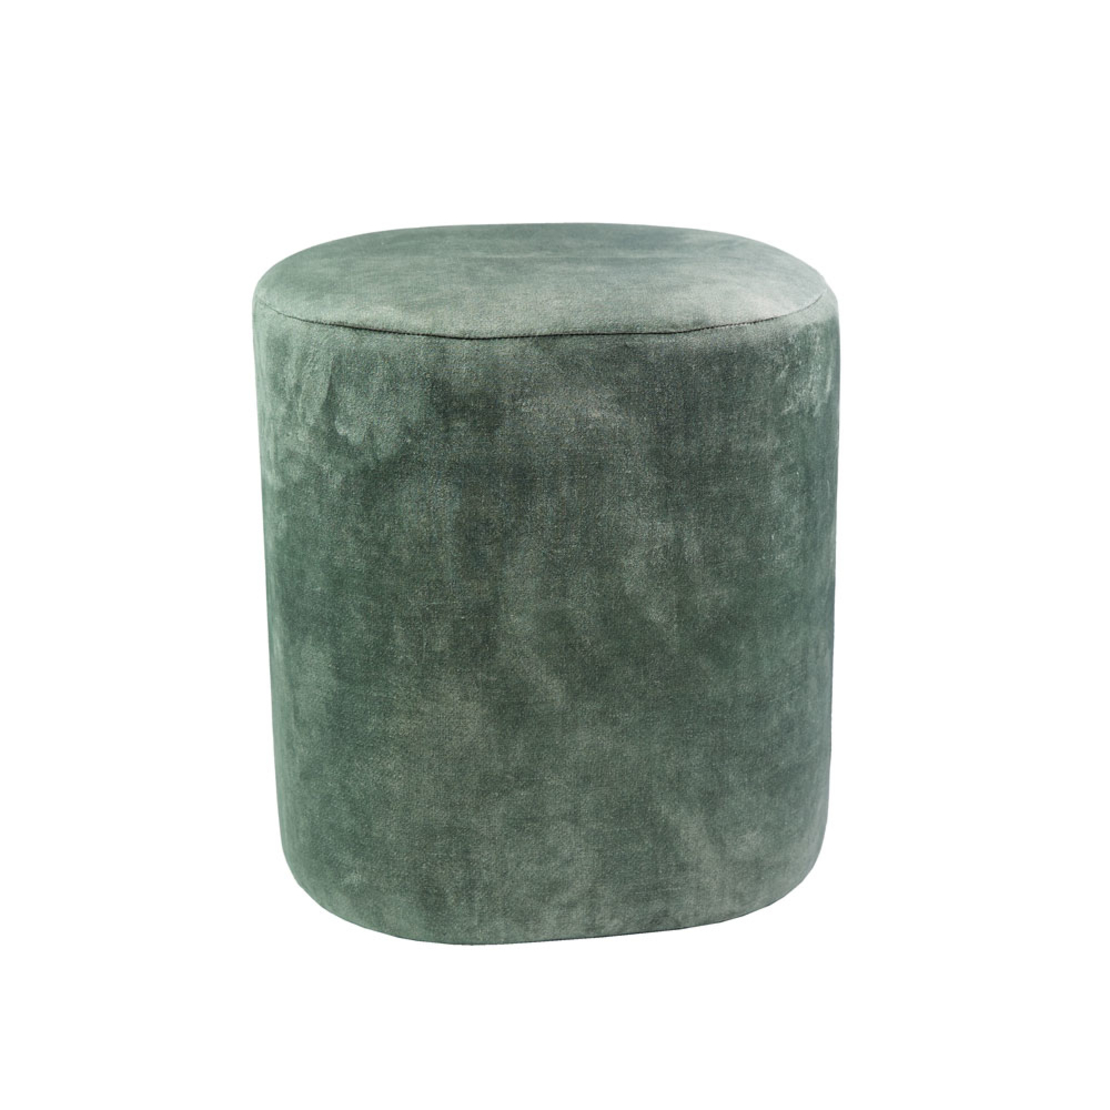 PACKMAN STOOL FABRIC OLIVE GREEN E1 PRC